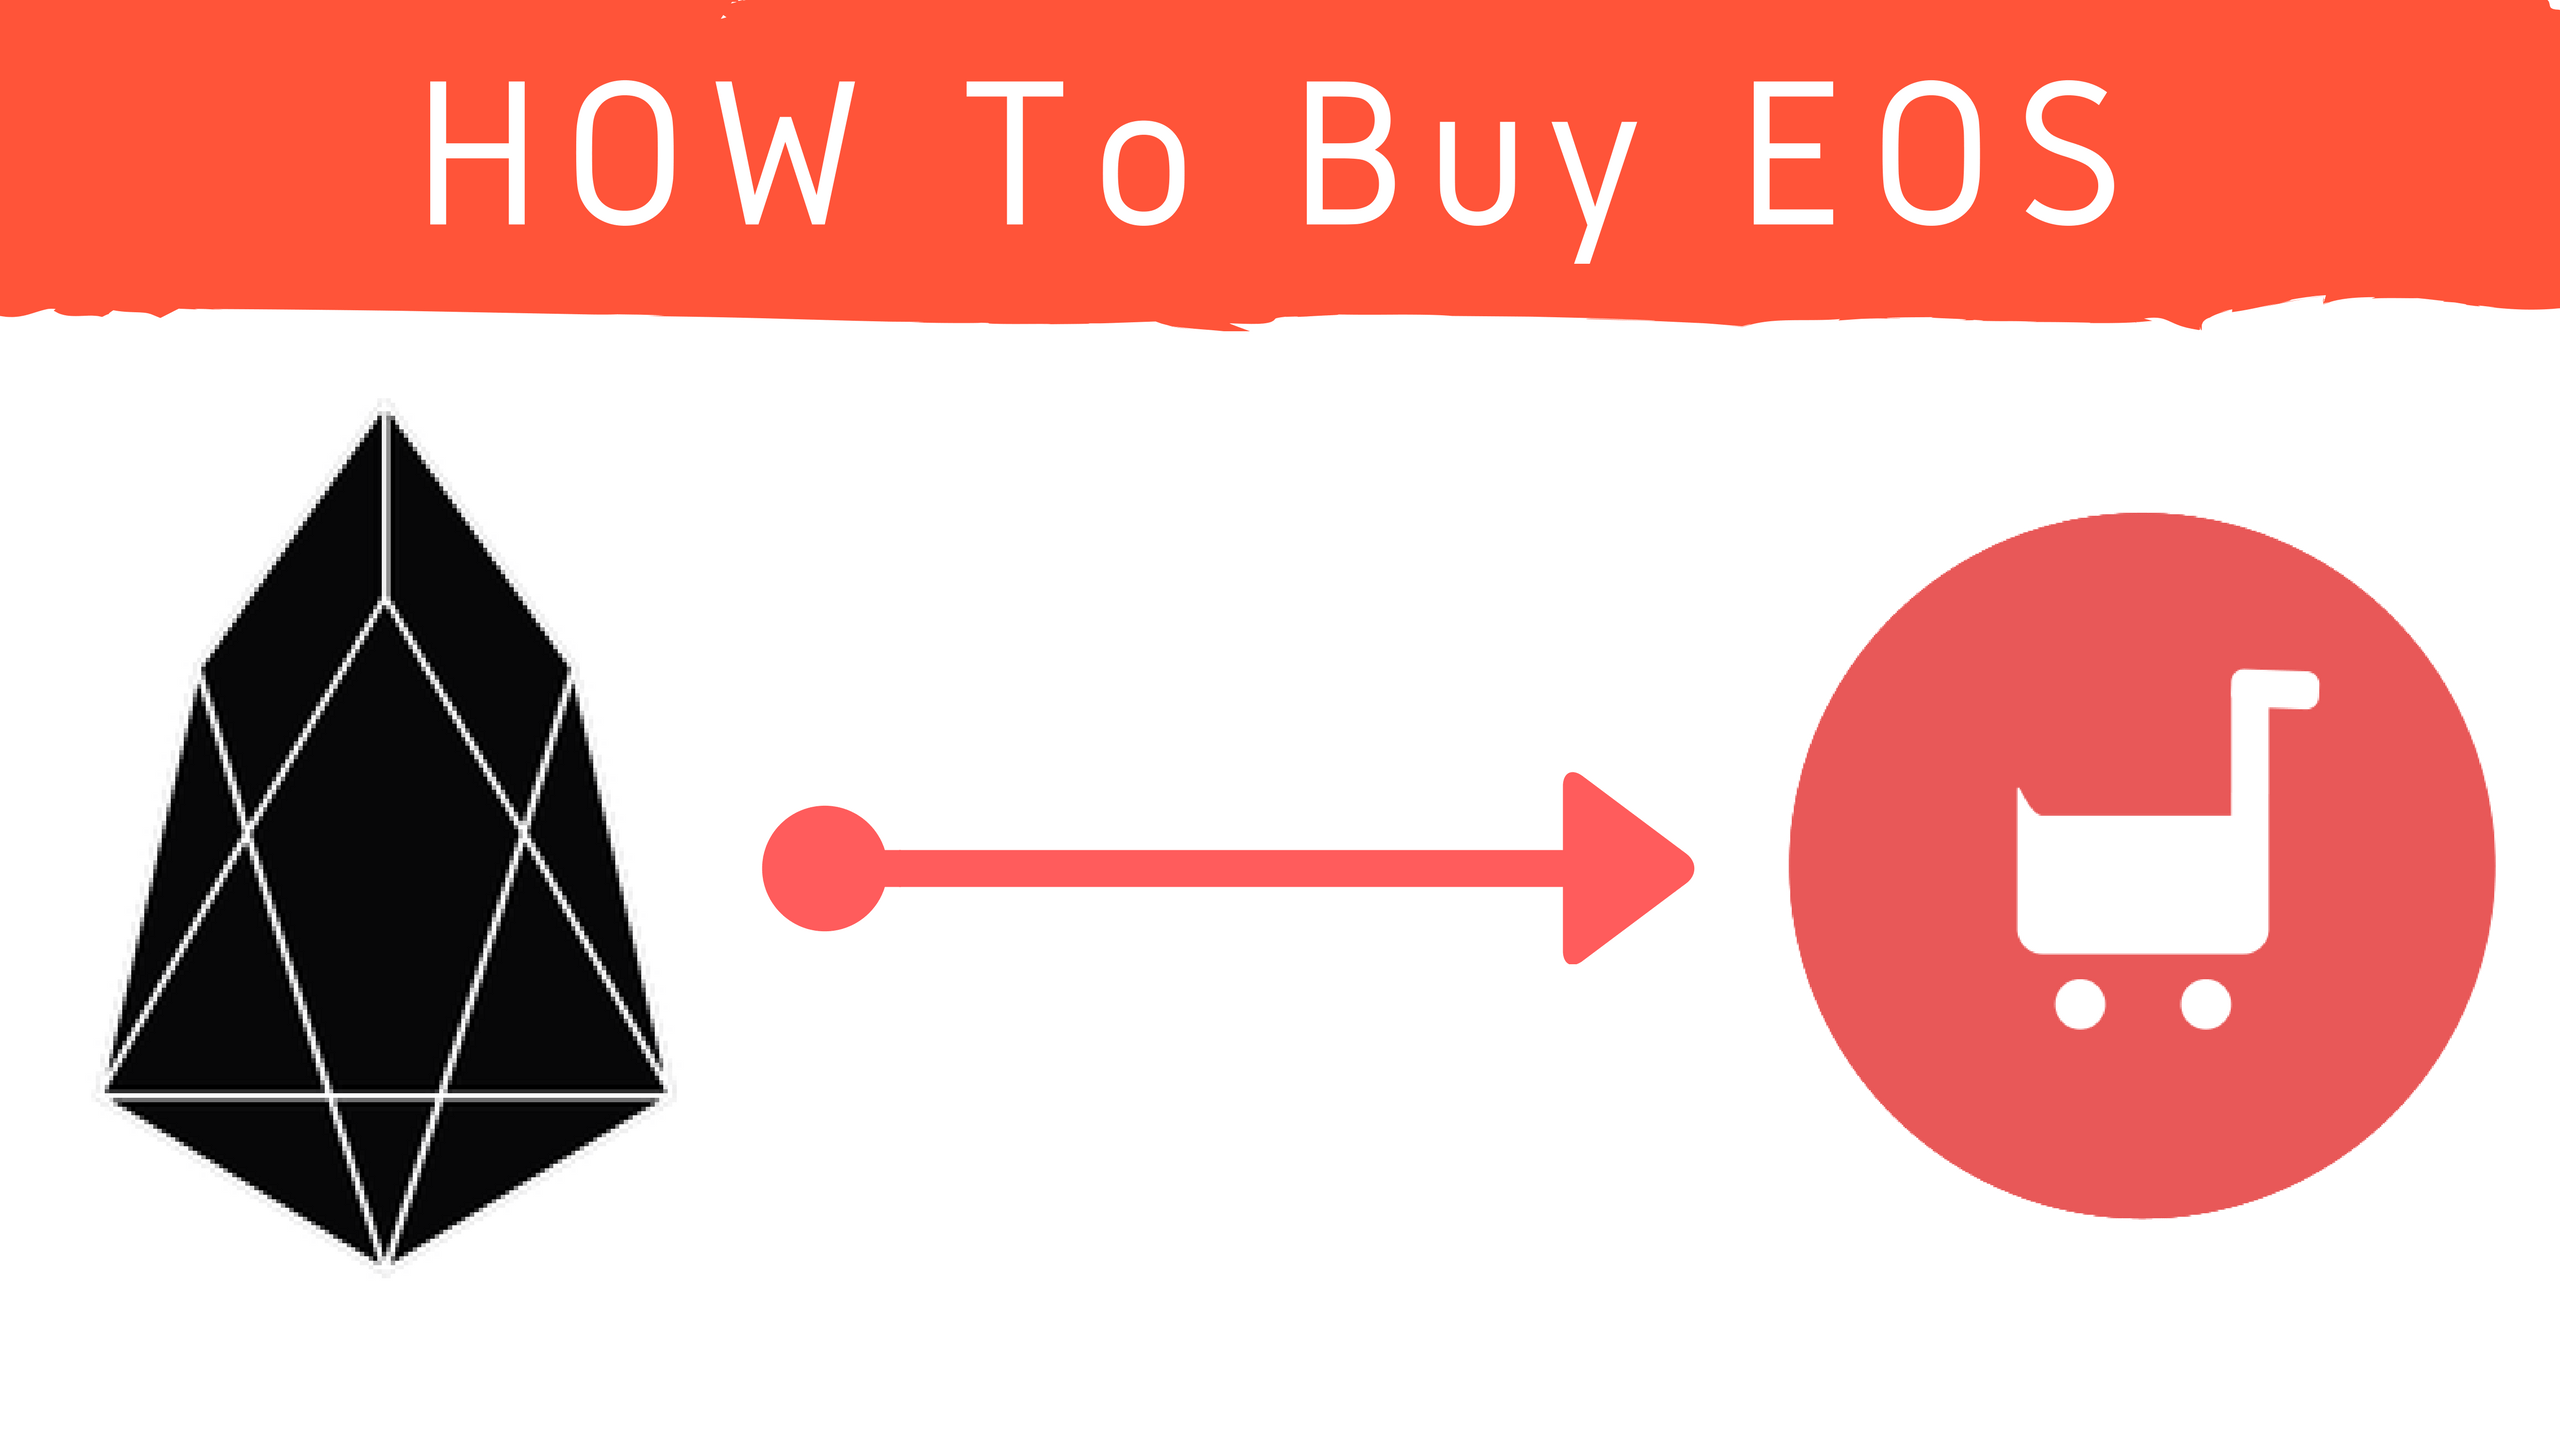 [GUIDE] What Is EOS? Features , Buy & Prediction 2020